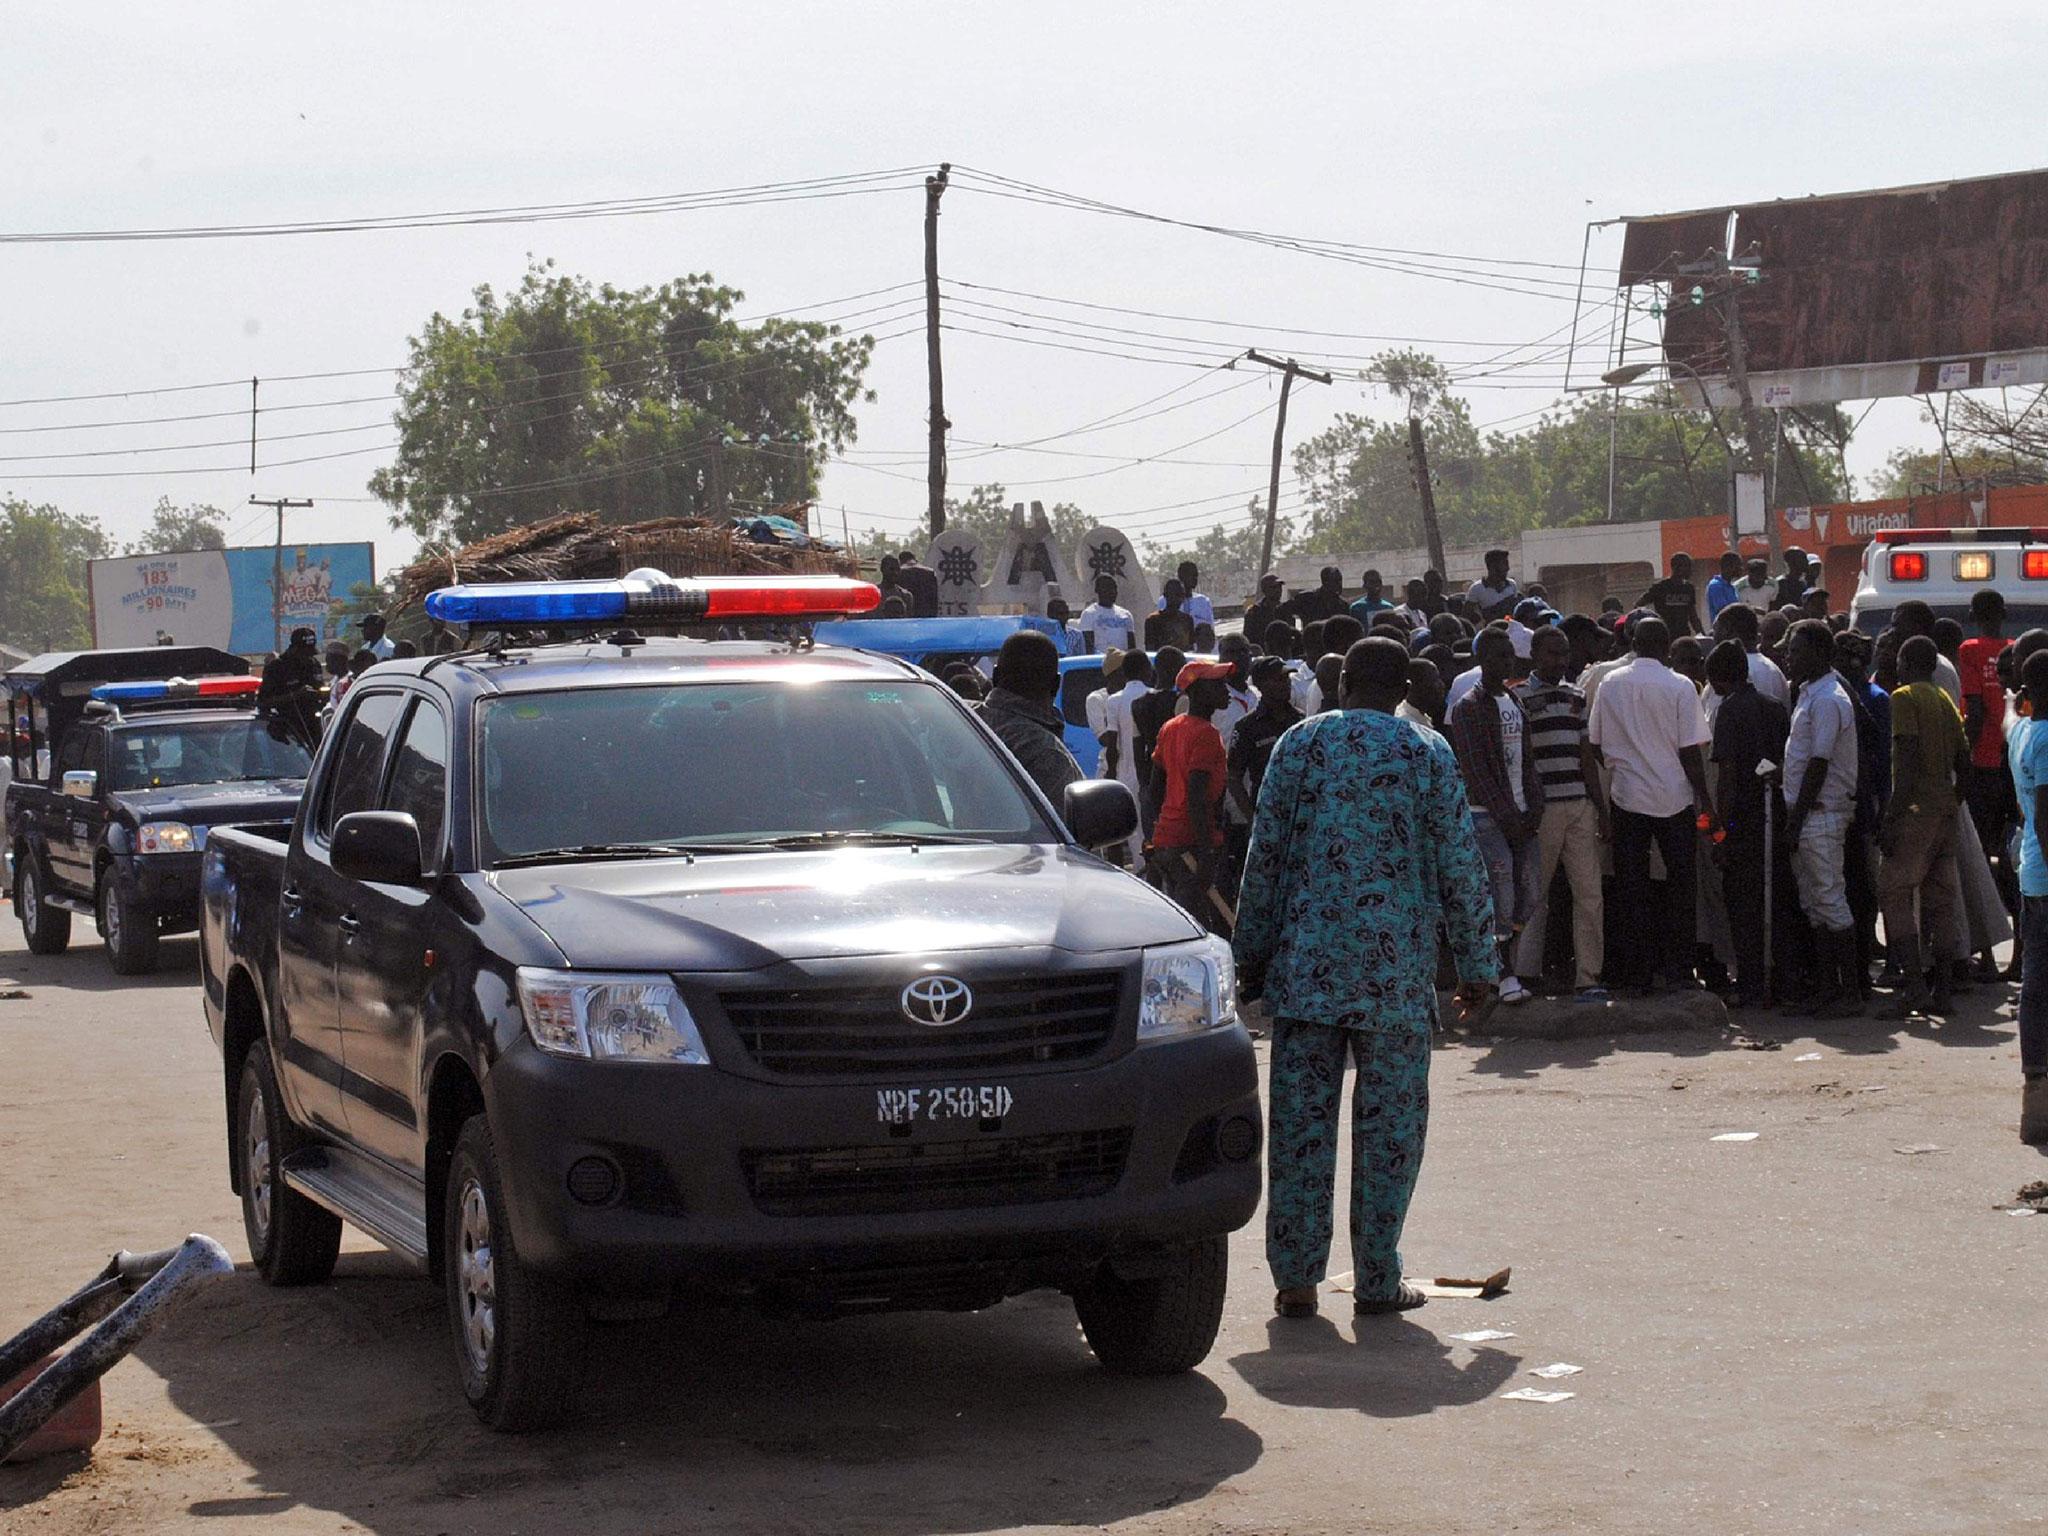 Maiduguri has been hit by a string of suicide bombings